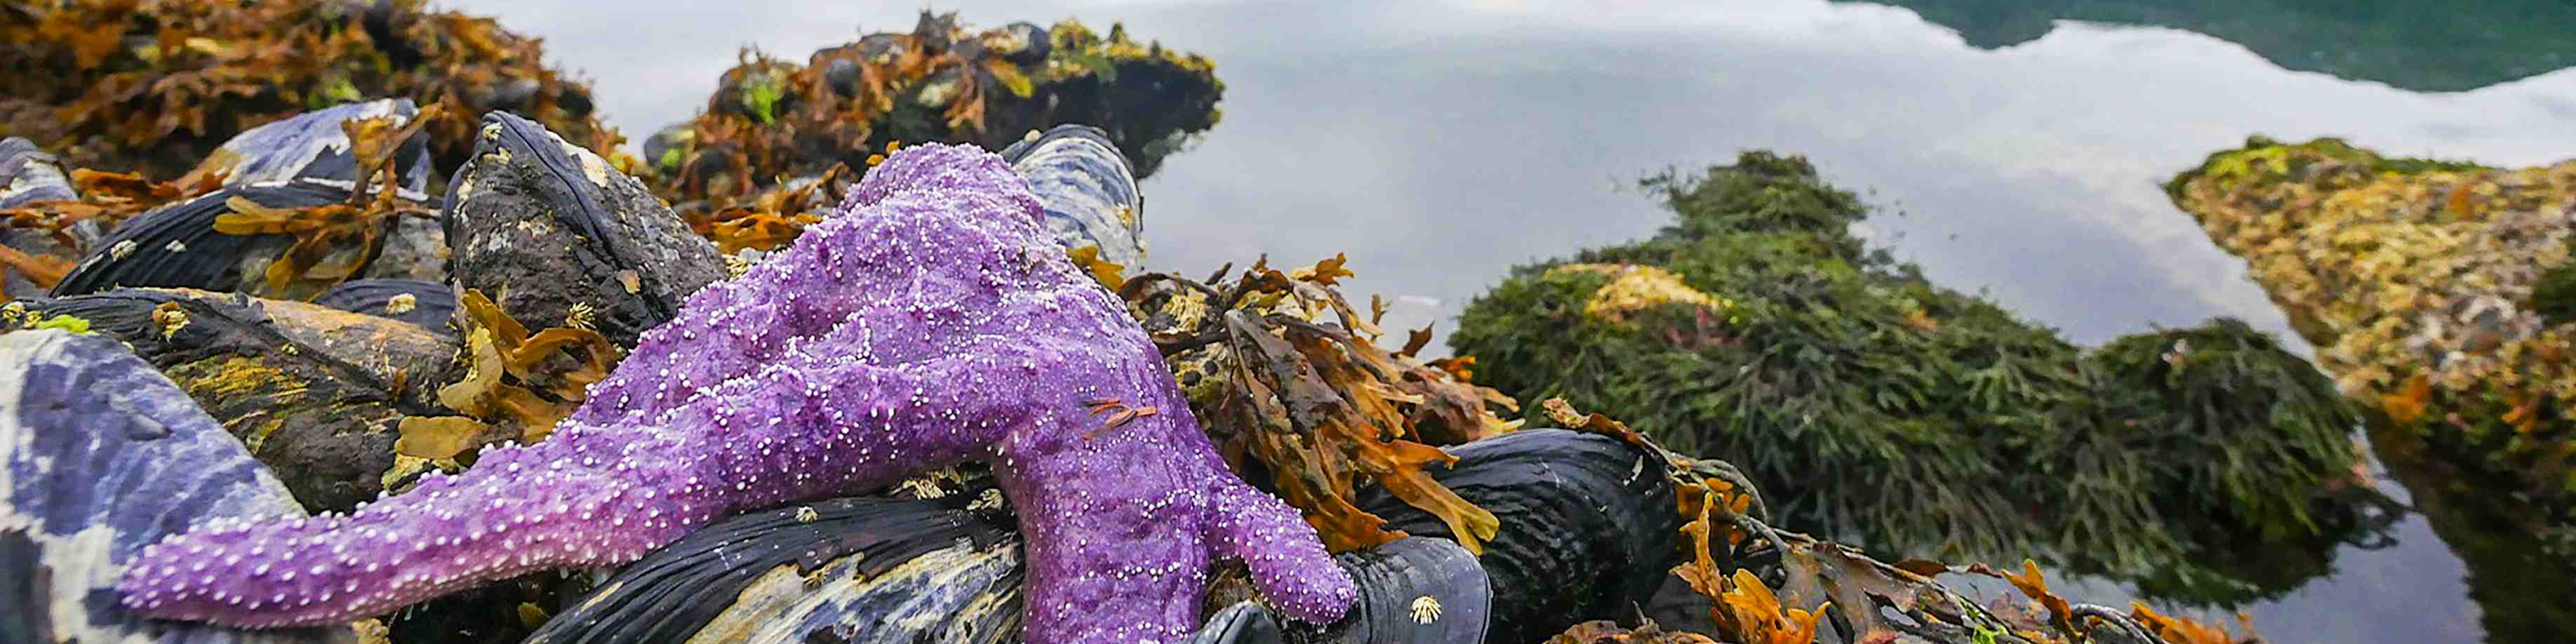 An intertidal scene from Gwaii Haanas including a purple sea star, mussels and kelp.